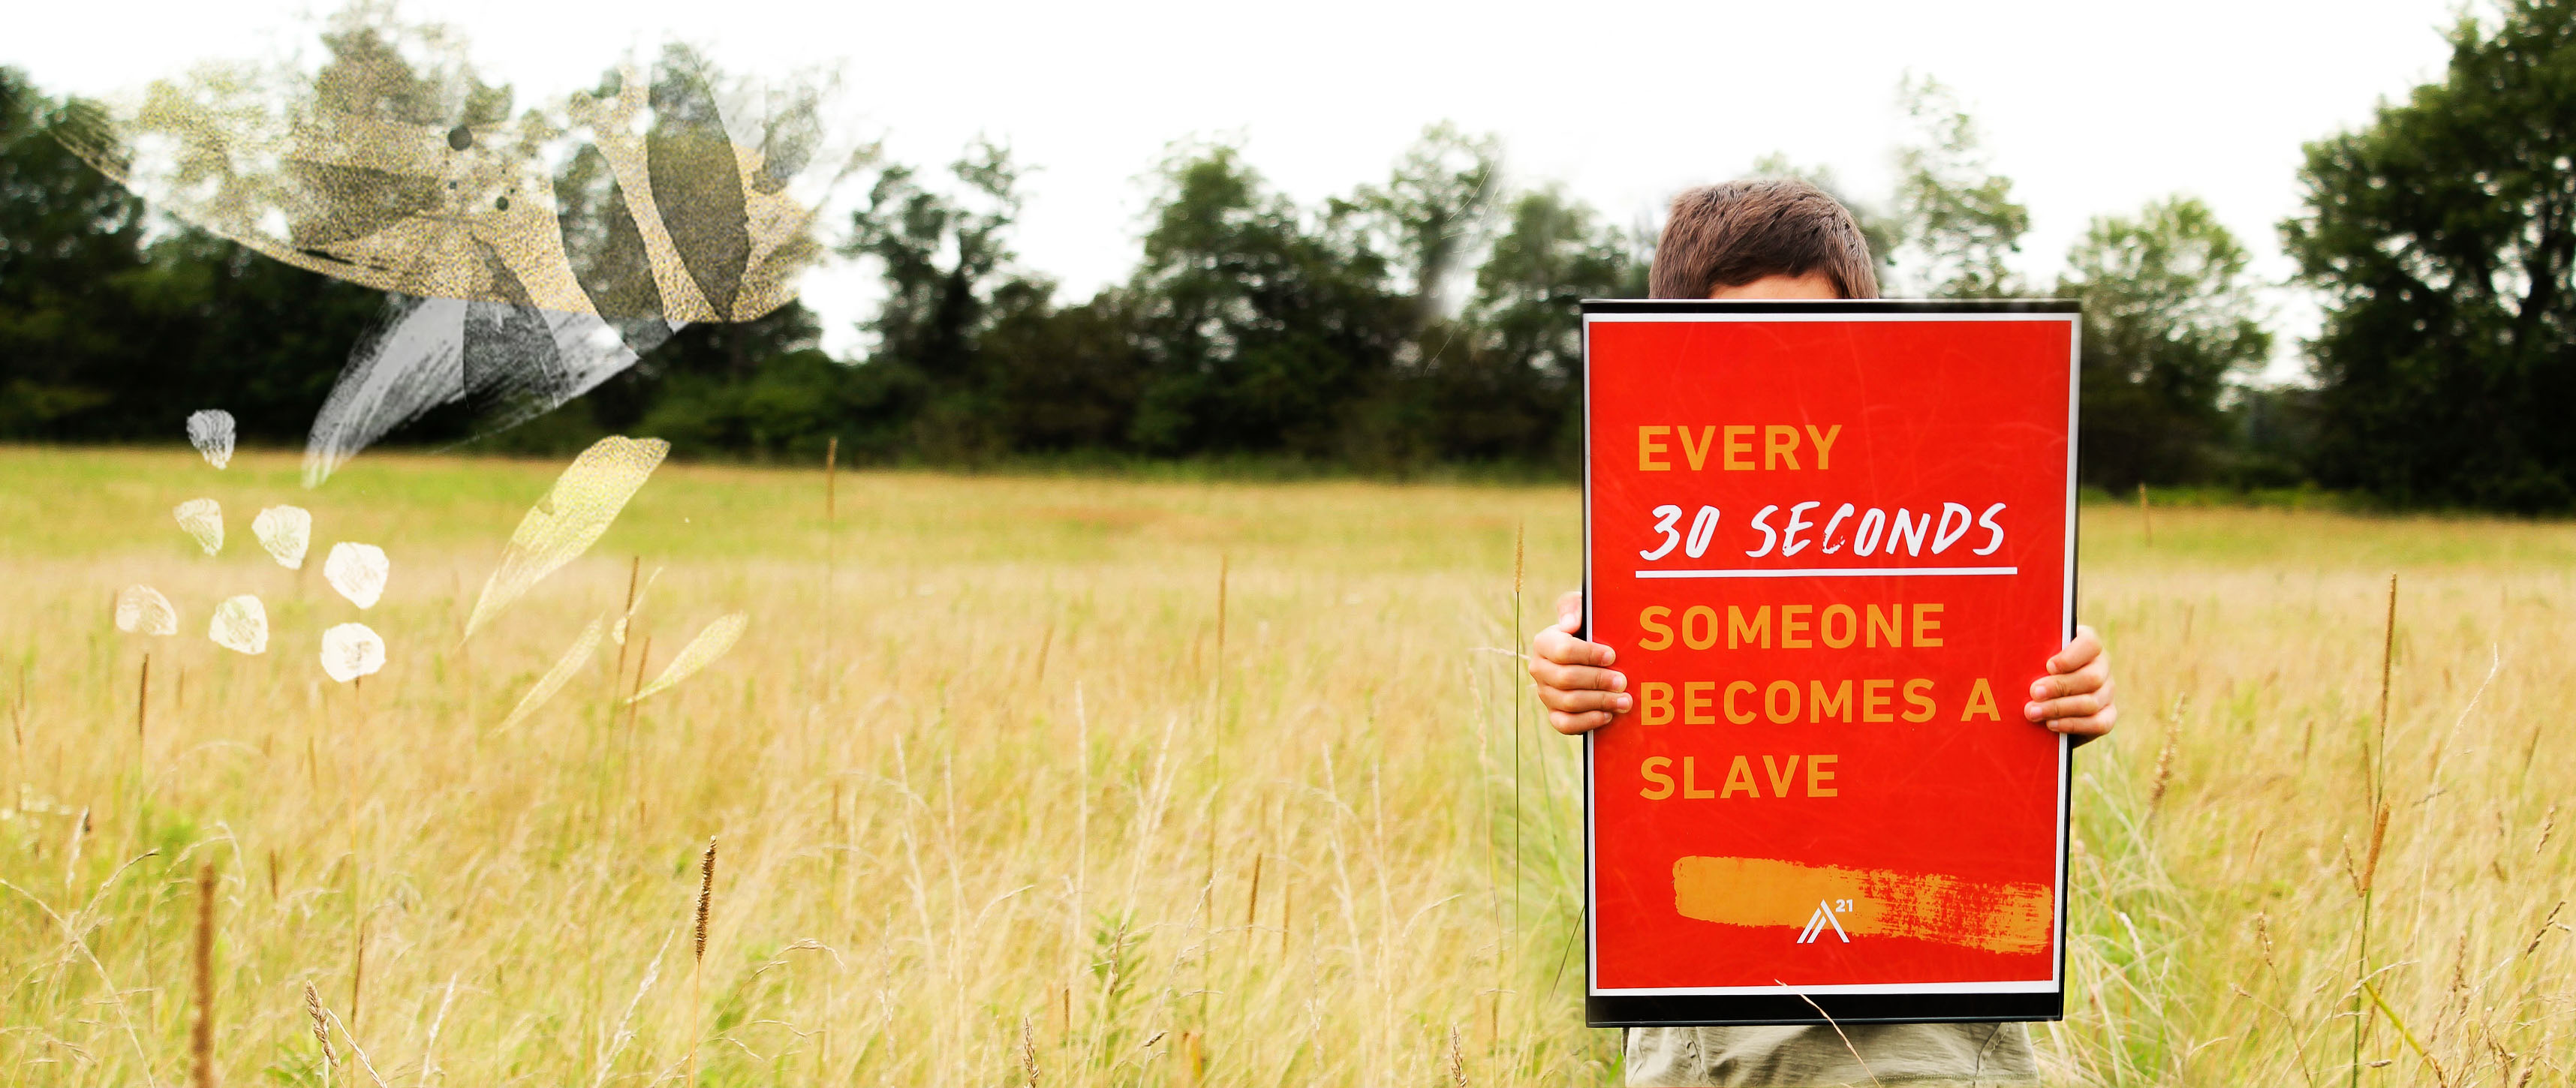 every 30 seconds someone becomes a slave